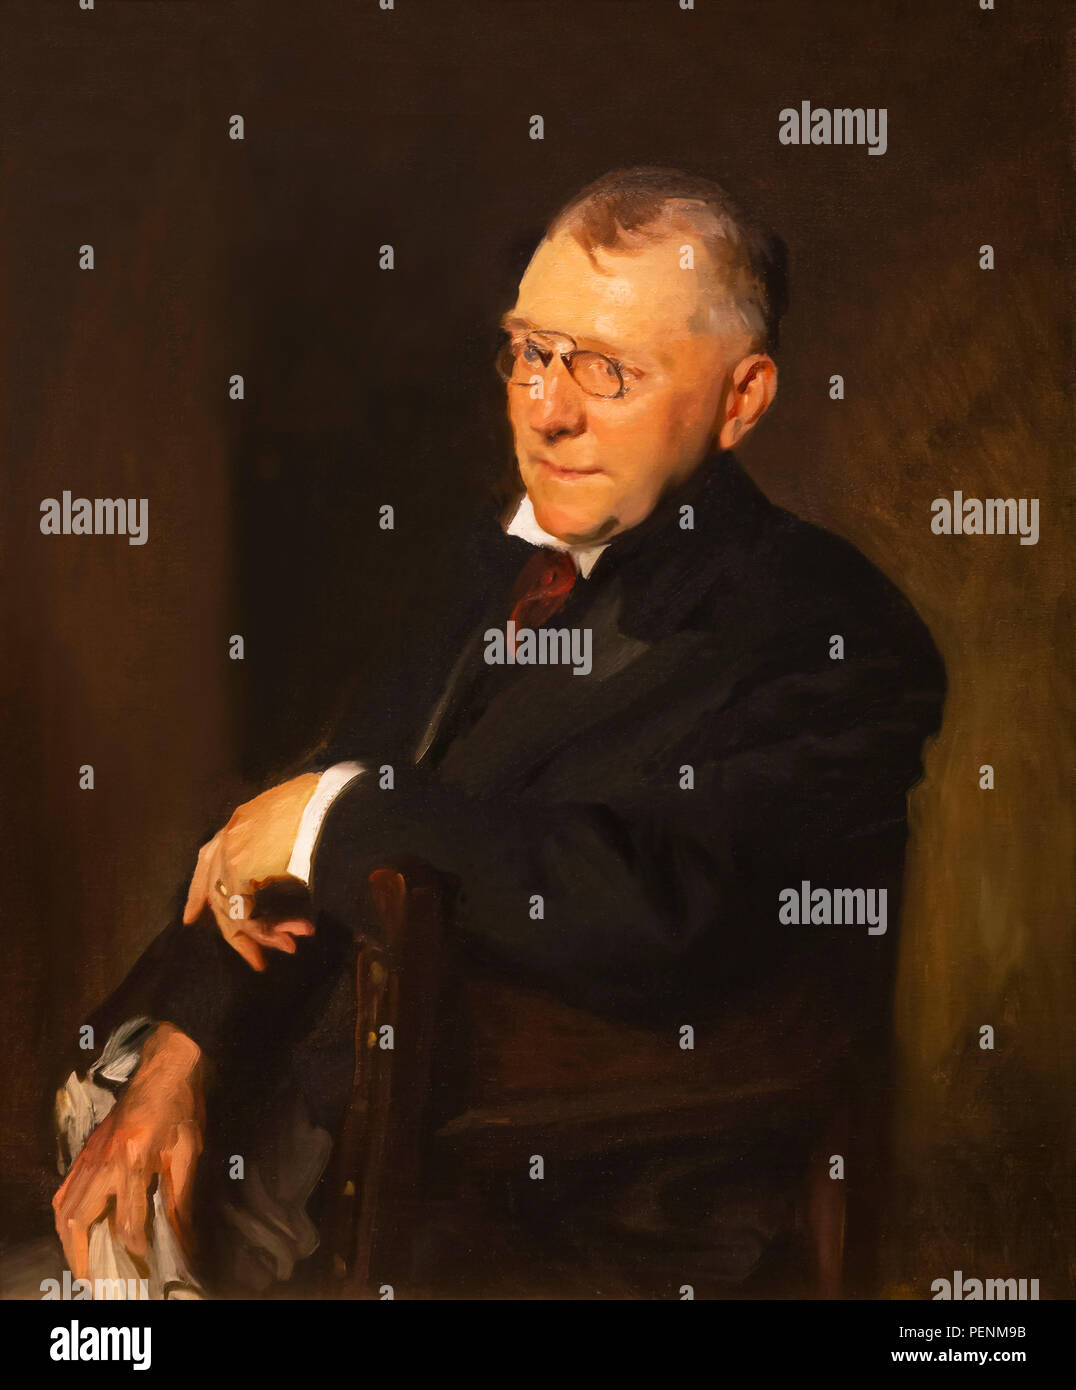 Portrait of James Whitcomb Riley, John Singer Sargent, 1903, Indianapolis Museum of Art, Indianapolis, Indiana, USA, North America Stock Photo